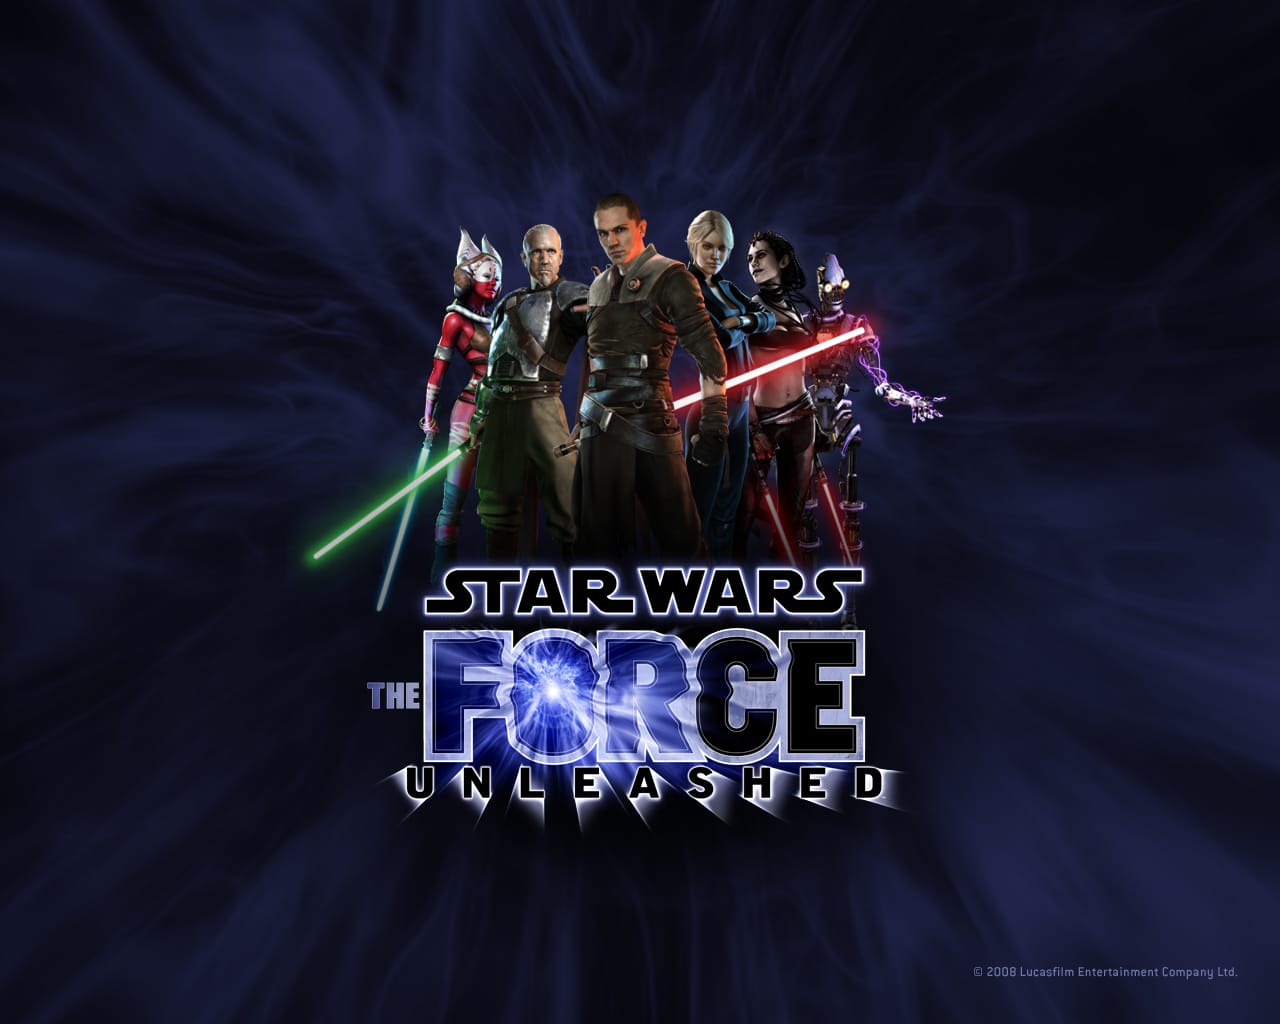 Star Wars The Force Unleashed Wallpaper 2 1280 1024